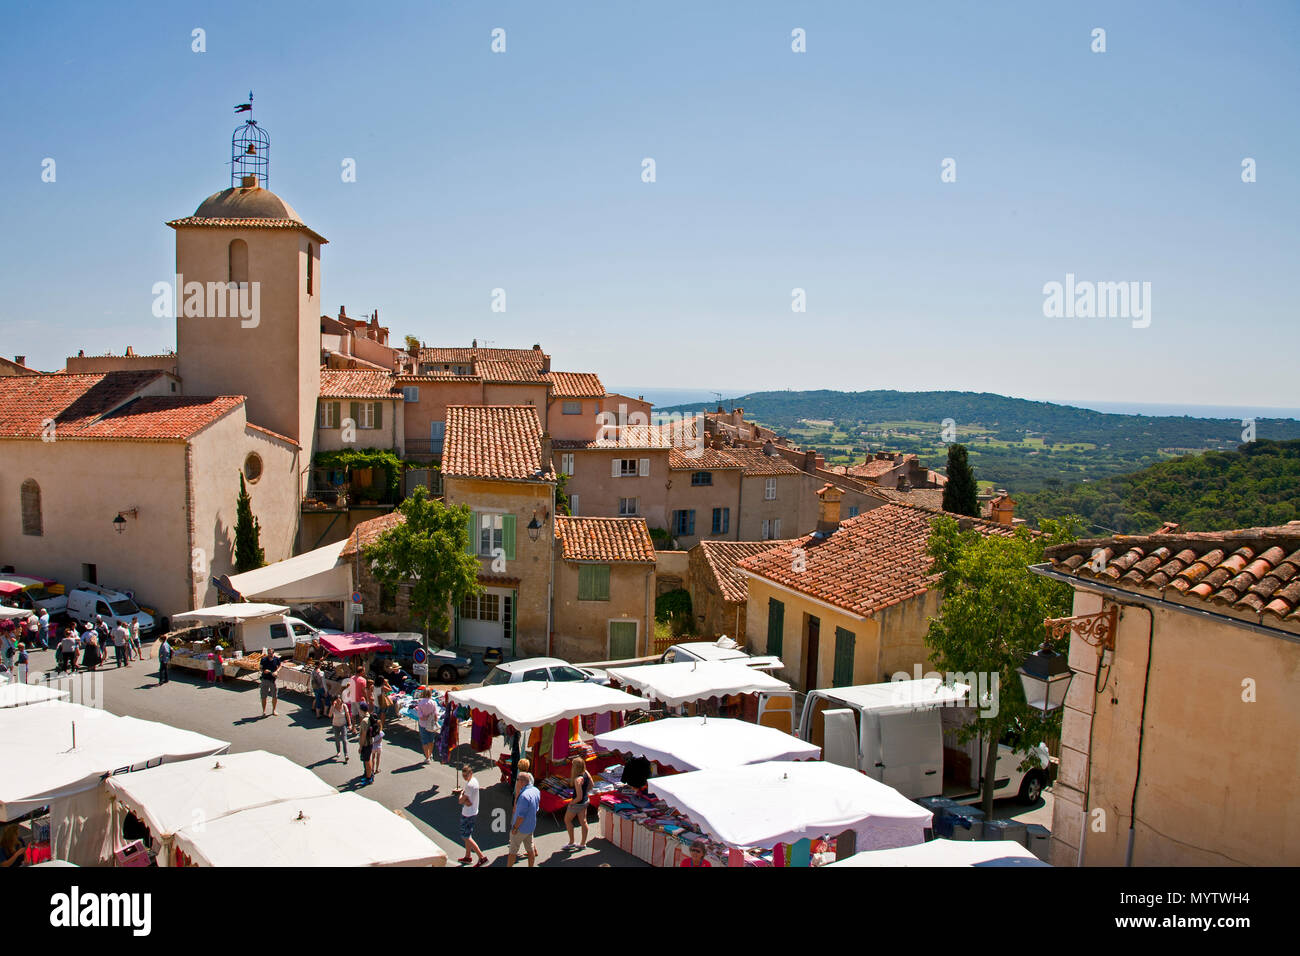 May 15, 2016: Ramatuelle, France: the church and village in Ramatuelle, St Tropez Stock Photo